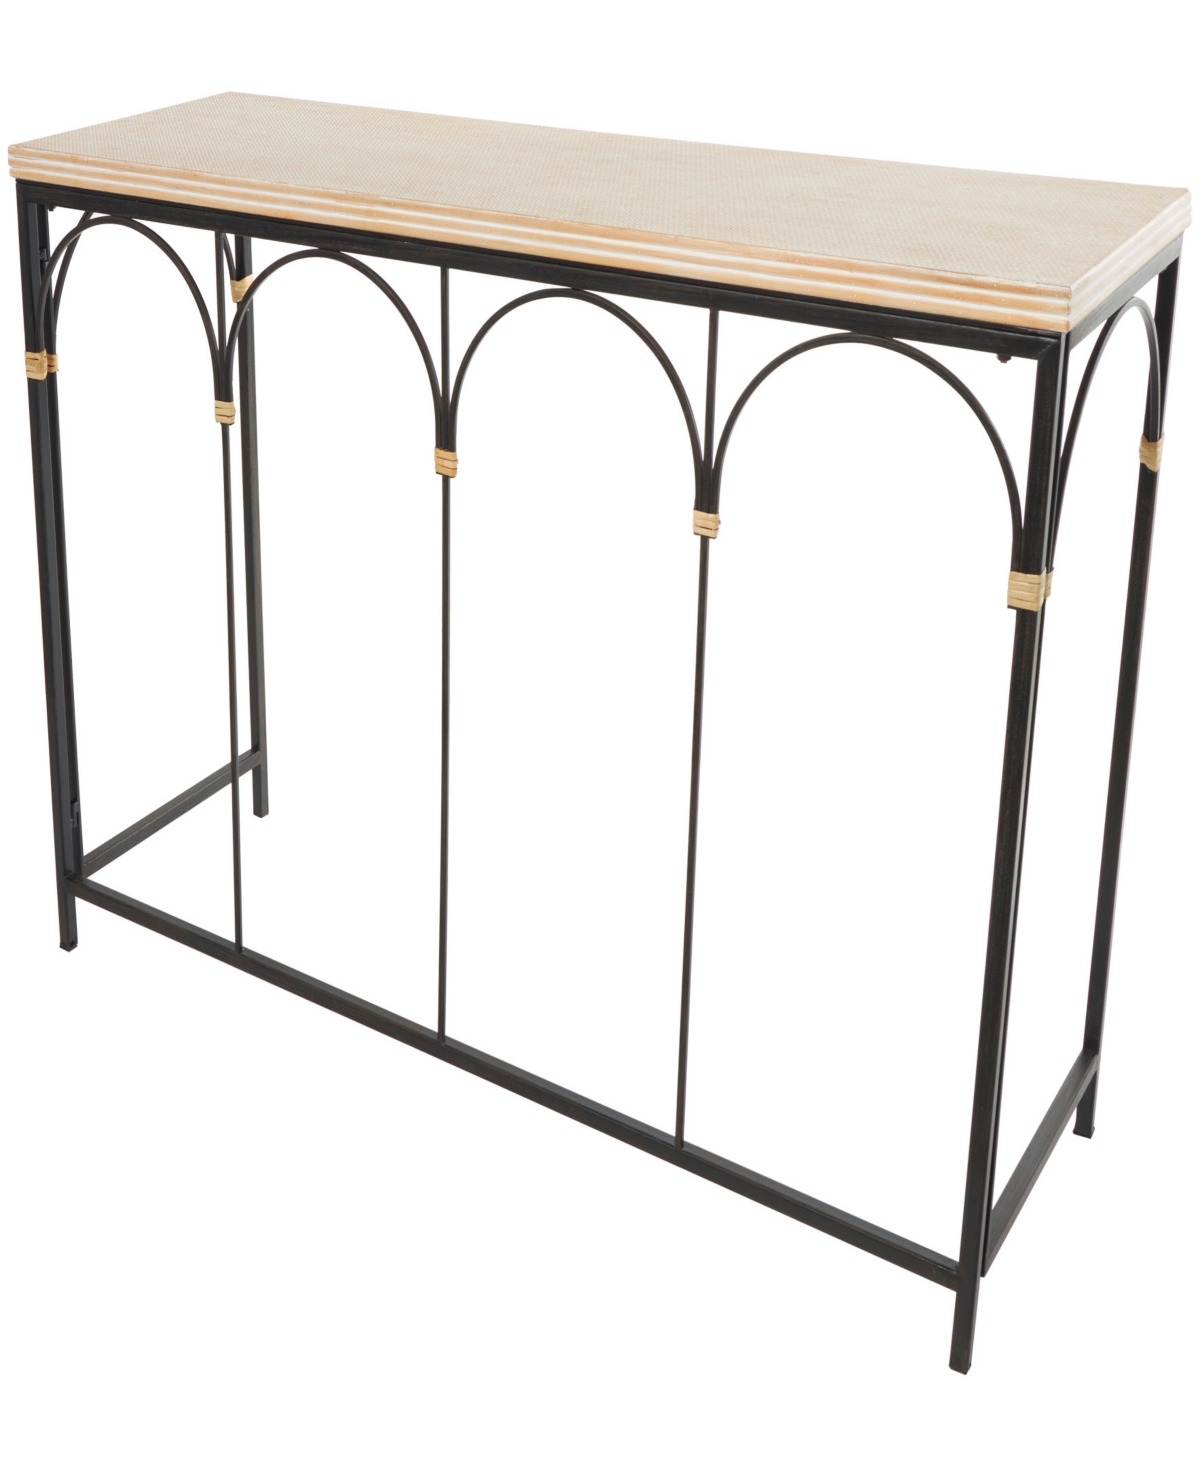 Rosemary Lane 43" X 15" X 31" Wooden Arched Wood Zig Zag Patterned Top And Rattan Accents Console Table In Black